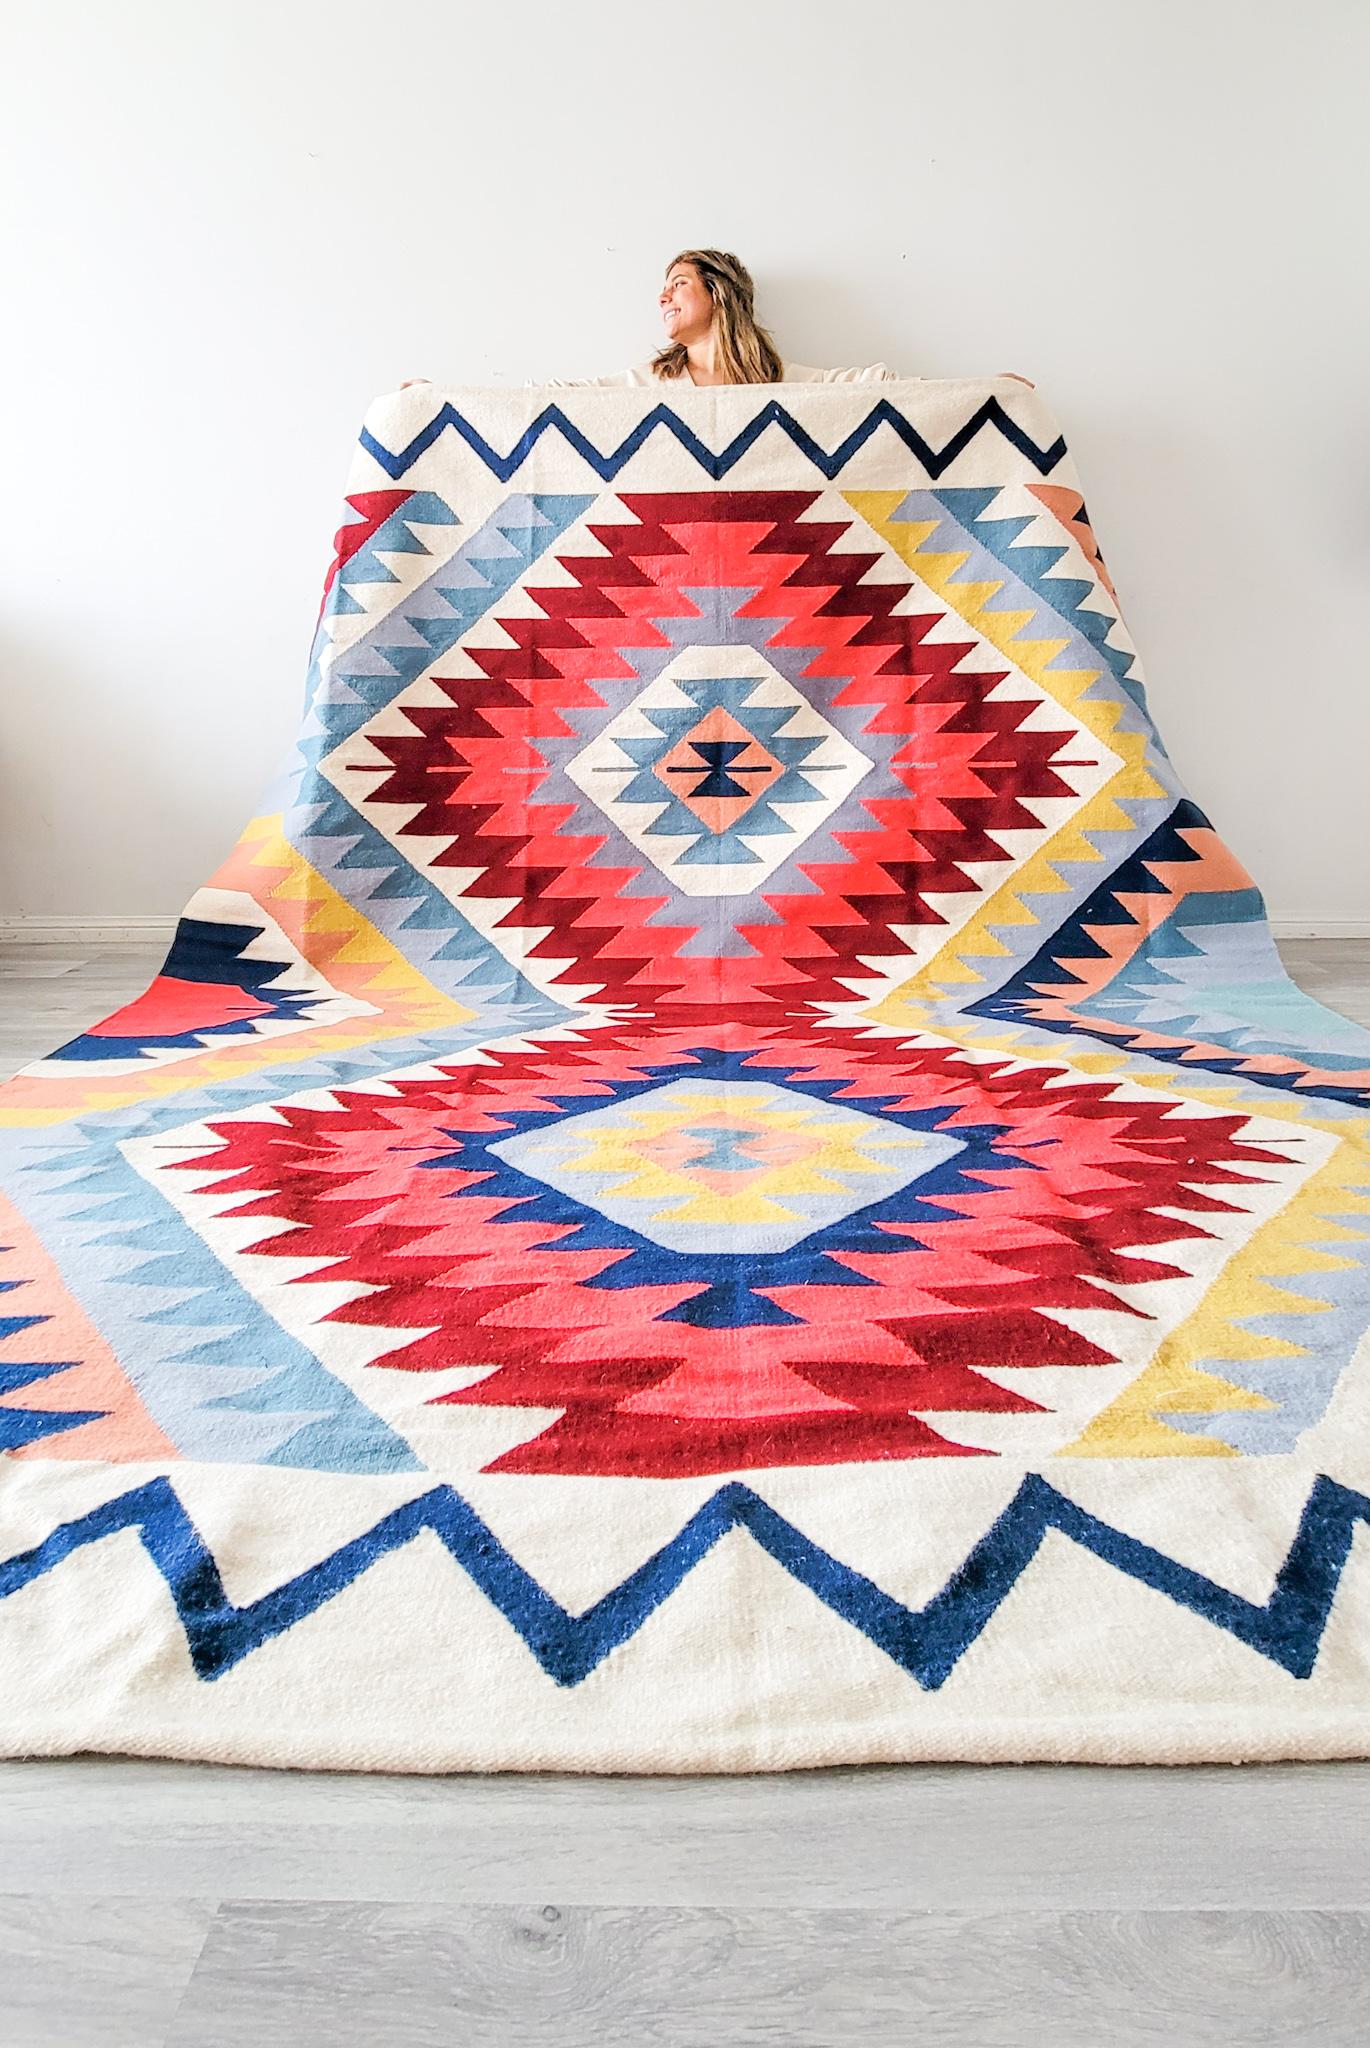 Luxor's handwoven kilim rug is a bright-colored area rug that will add a sense of personality and warmth to your space.

Product Description
Made of natural wool 
Colours:  Burgundy, yellow, Blue, Salmon, Cream, Mint, Purple, Navy, Green
Designed in